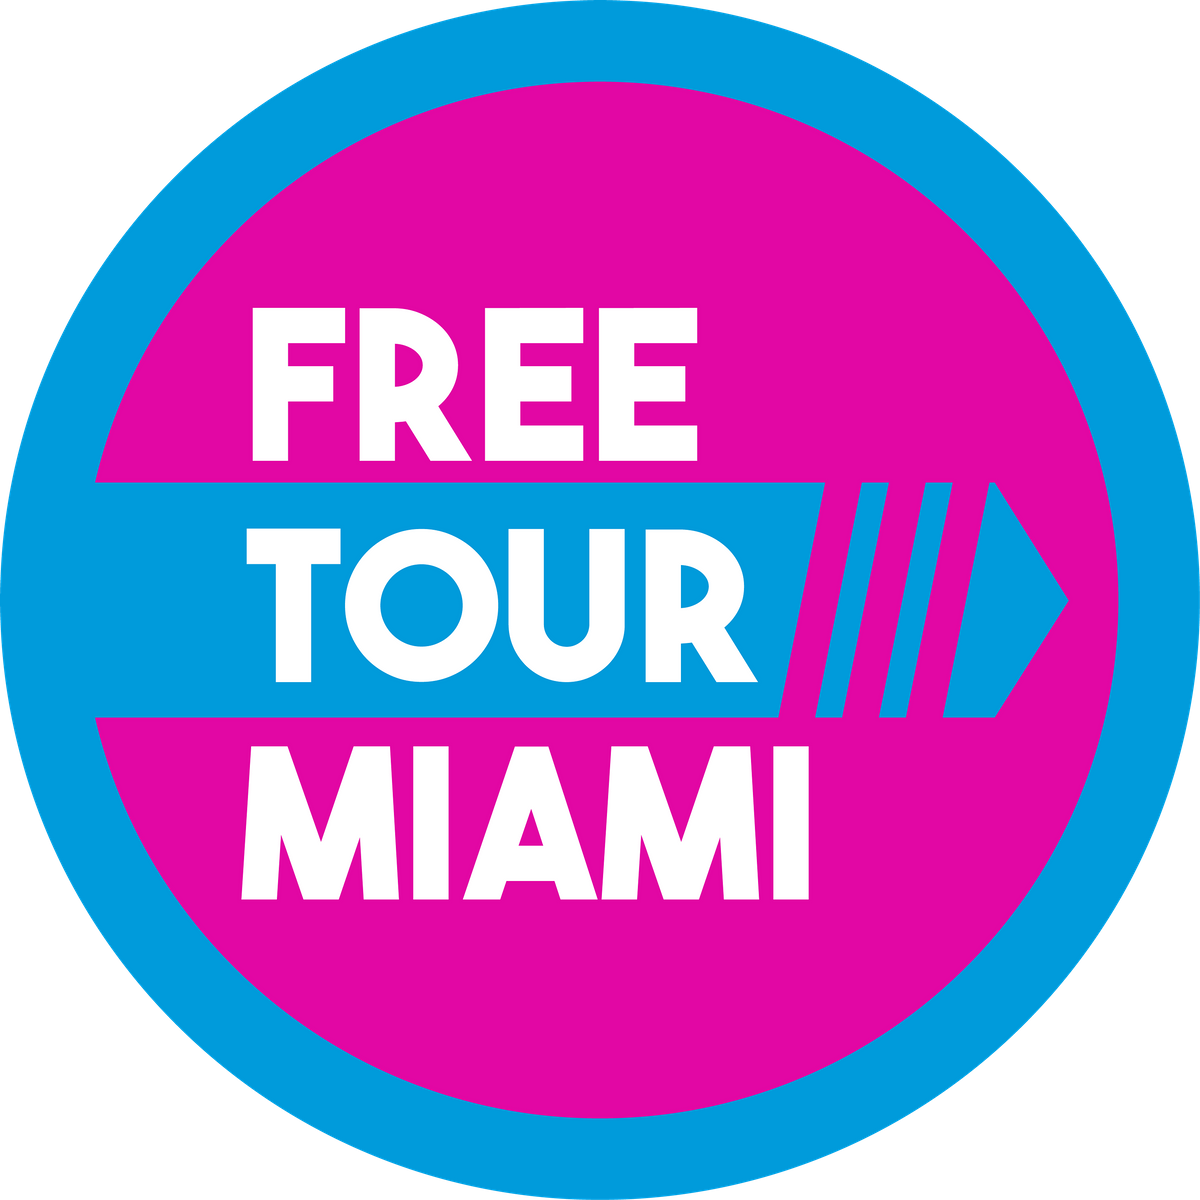 MONTHLY GIVEAWAY -WIN A FREE MIAMI BOAT AND BUS TOUR